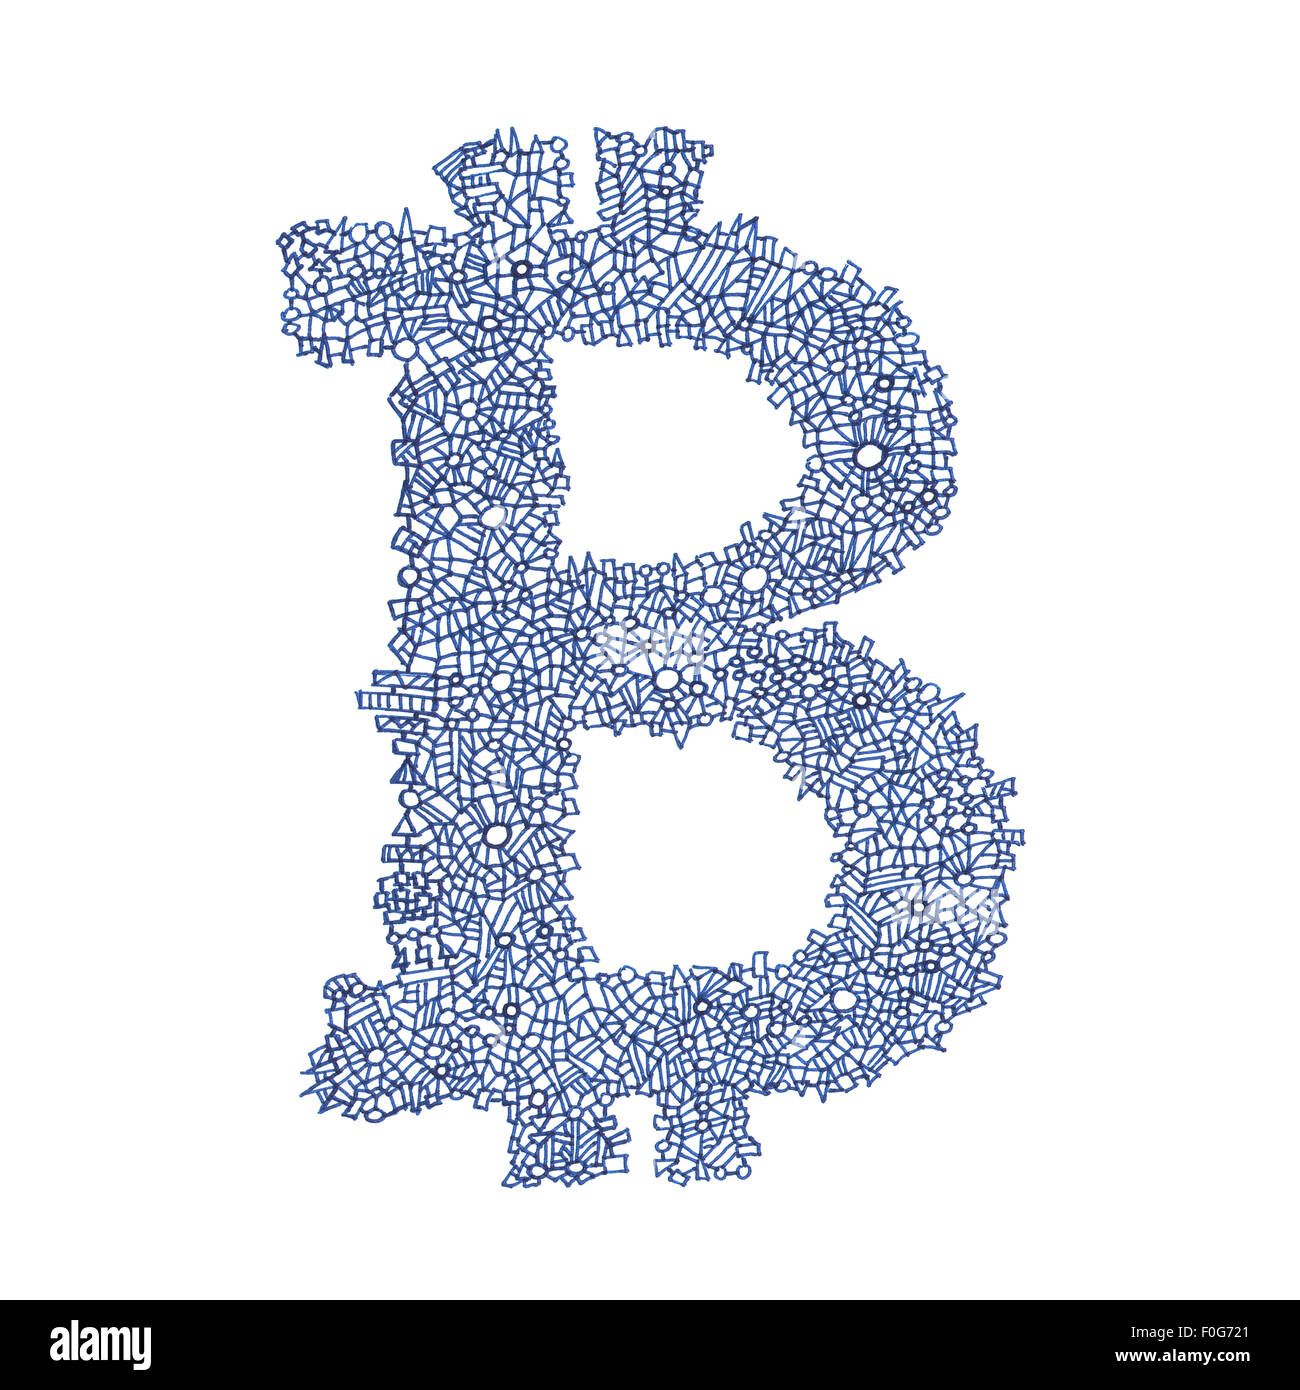 Bitcoin hand-drawn symbol of a digital decentralized crypto currency B&w Companion Rvk3305 For Ford Puck System